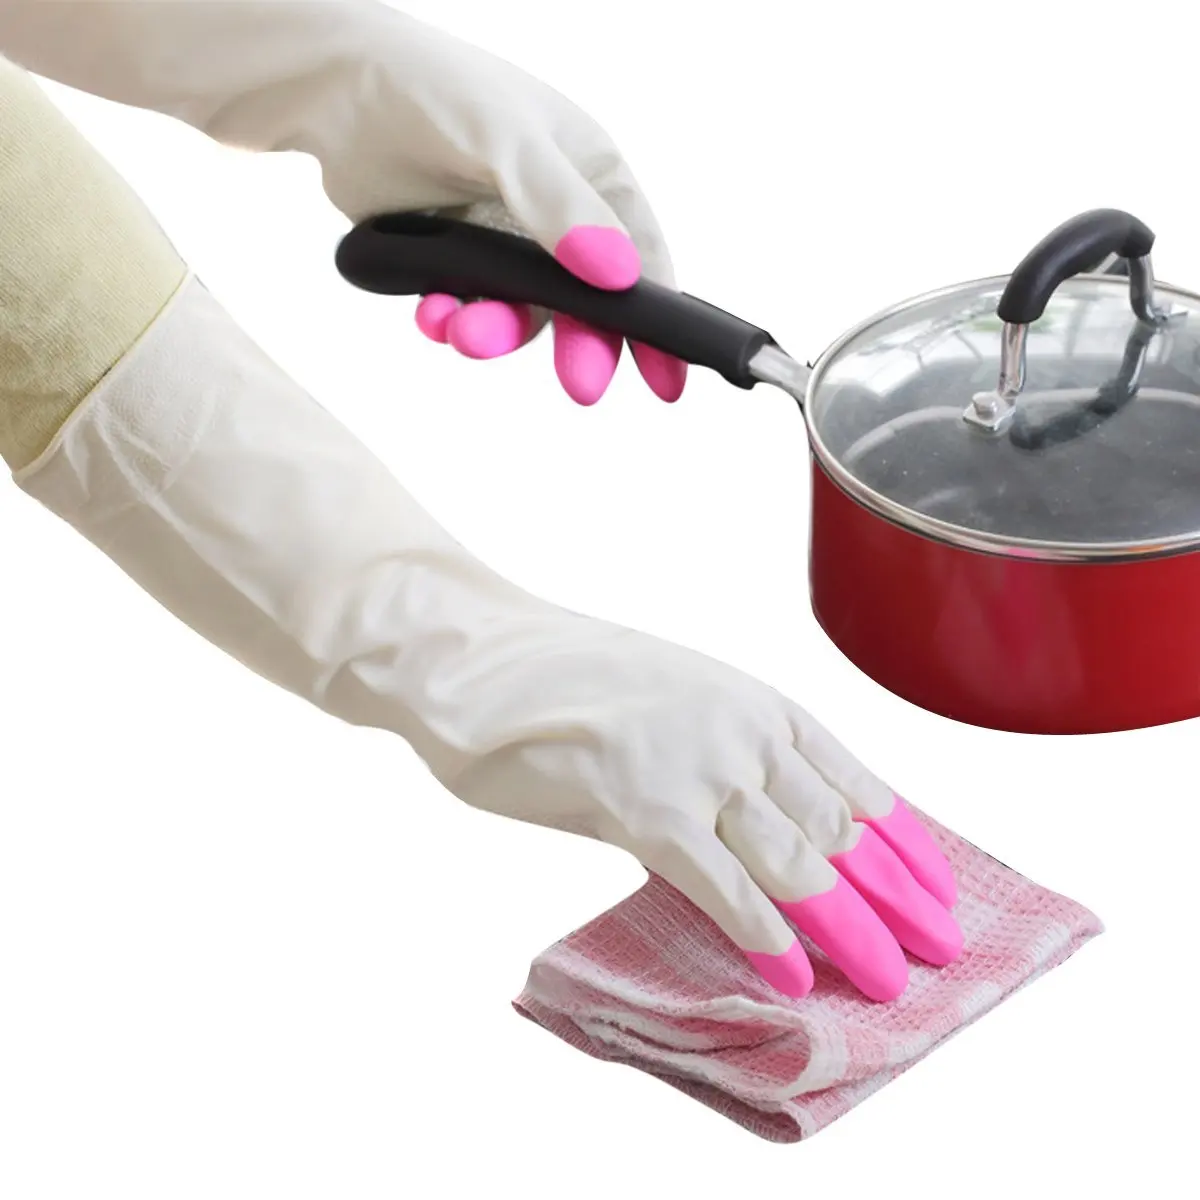 Cheap Pink Cleaning Gloves Find Pink Cleaning Gloves Deals On Line At